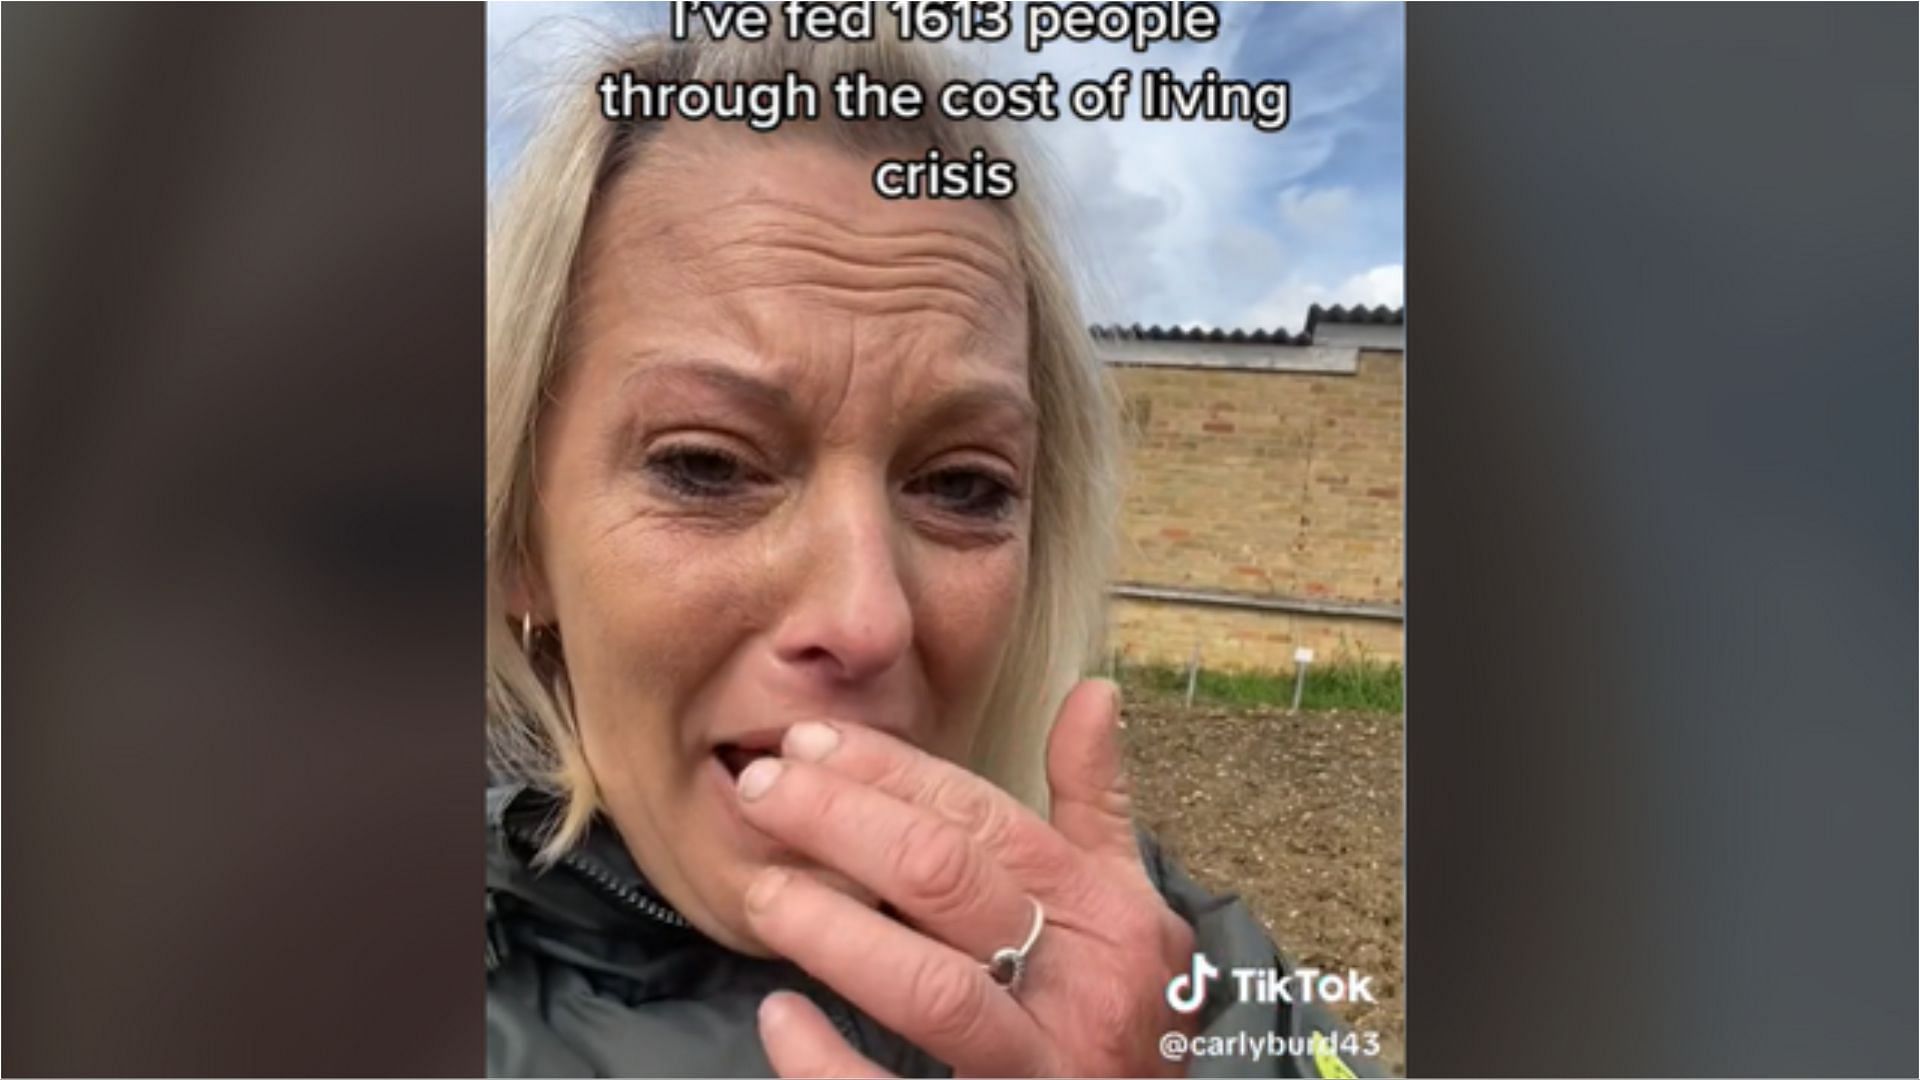 Carly Burd has launched a GoFundMe page after her garden was destroyed (Image via mbga_uk/Twitter)